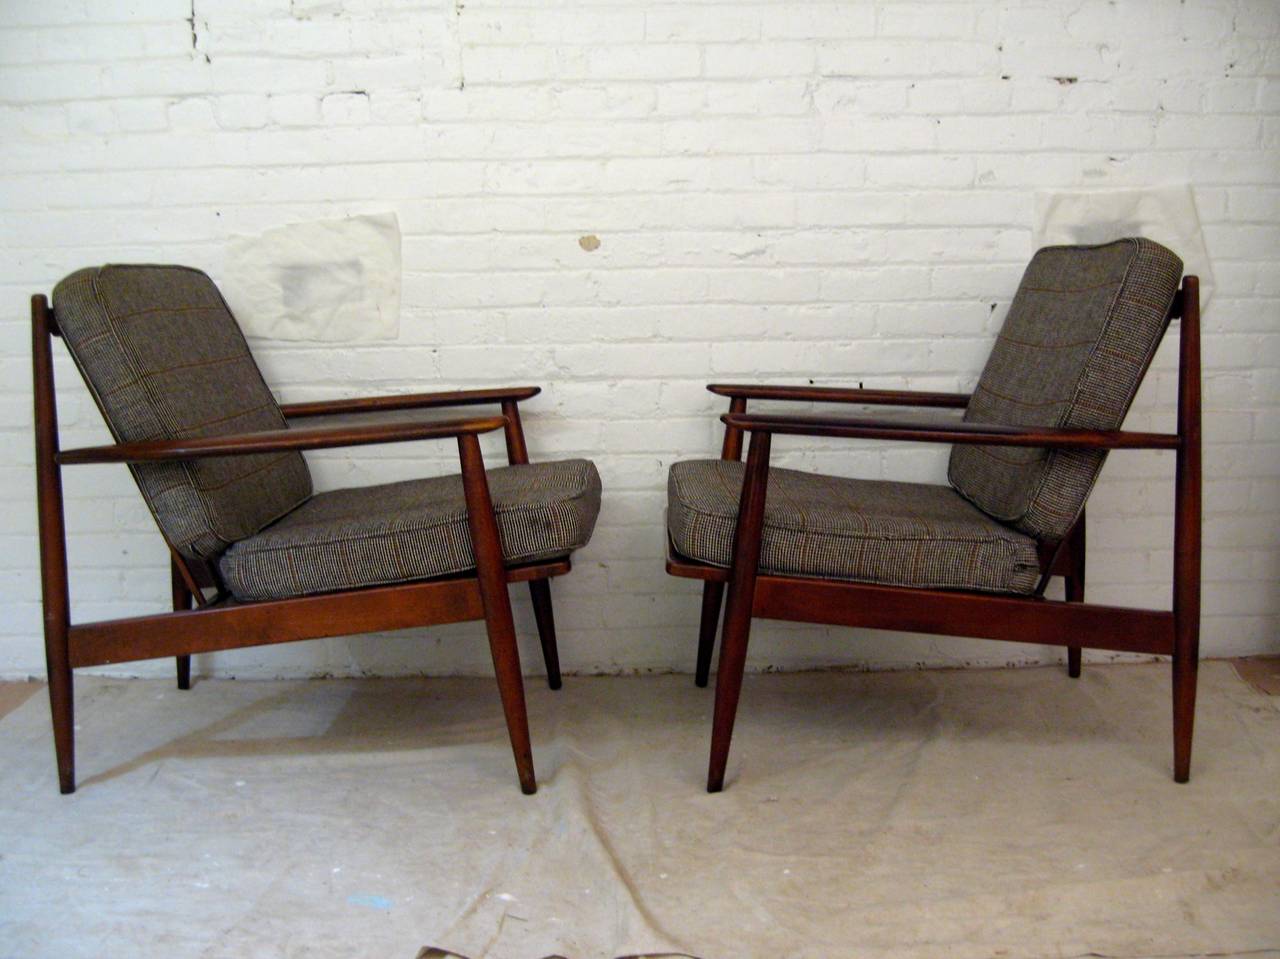 Excellent pair of Mid-Century Modern Baumritter lounge chairs, circa 1960. Unsigned. The frames are made of beech and ash. Amazing features include paddle arm, tapered legs and spindle backs. Still retains the original cushion fabric, but they do